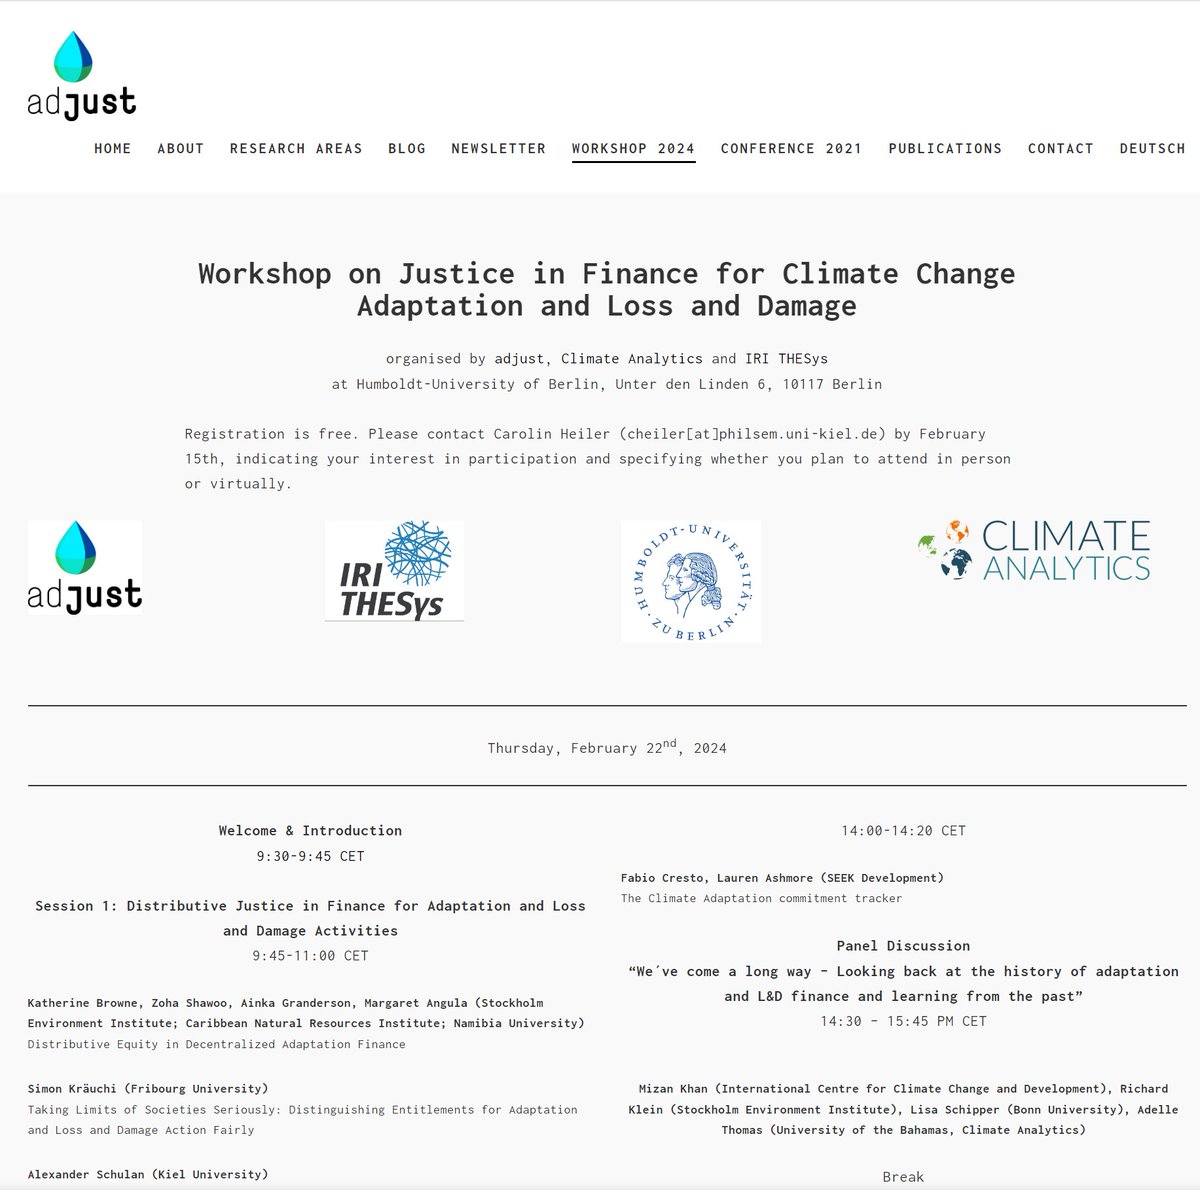 🛠️WORKSHOP: Join @CA_Latest, @IRI_THESys, & @HumboldtUni to explore 'Justice in Finance for #ClimateChange #Adaptation and #LossAndDamage'! 🗓️ 22–23 February 2024 📍Hybrid (Online & in Berlin) ✏️Register until 15/02/2024: adjust-climate.org/en/workshop-lo… 📜See the full schedule above 👆